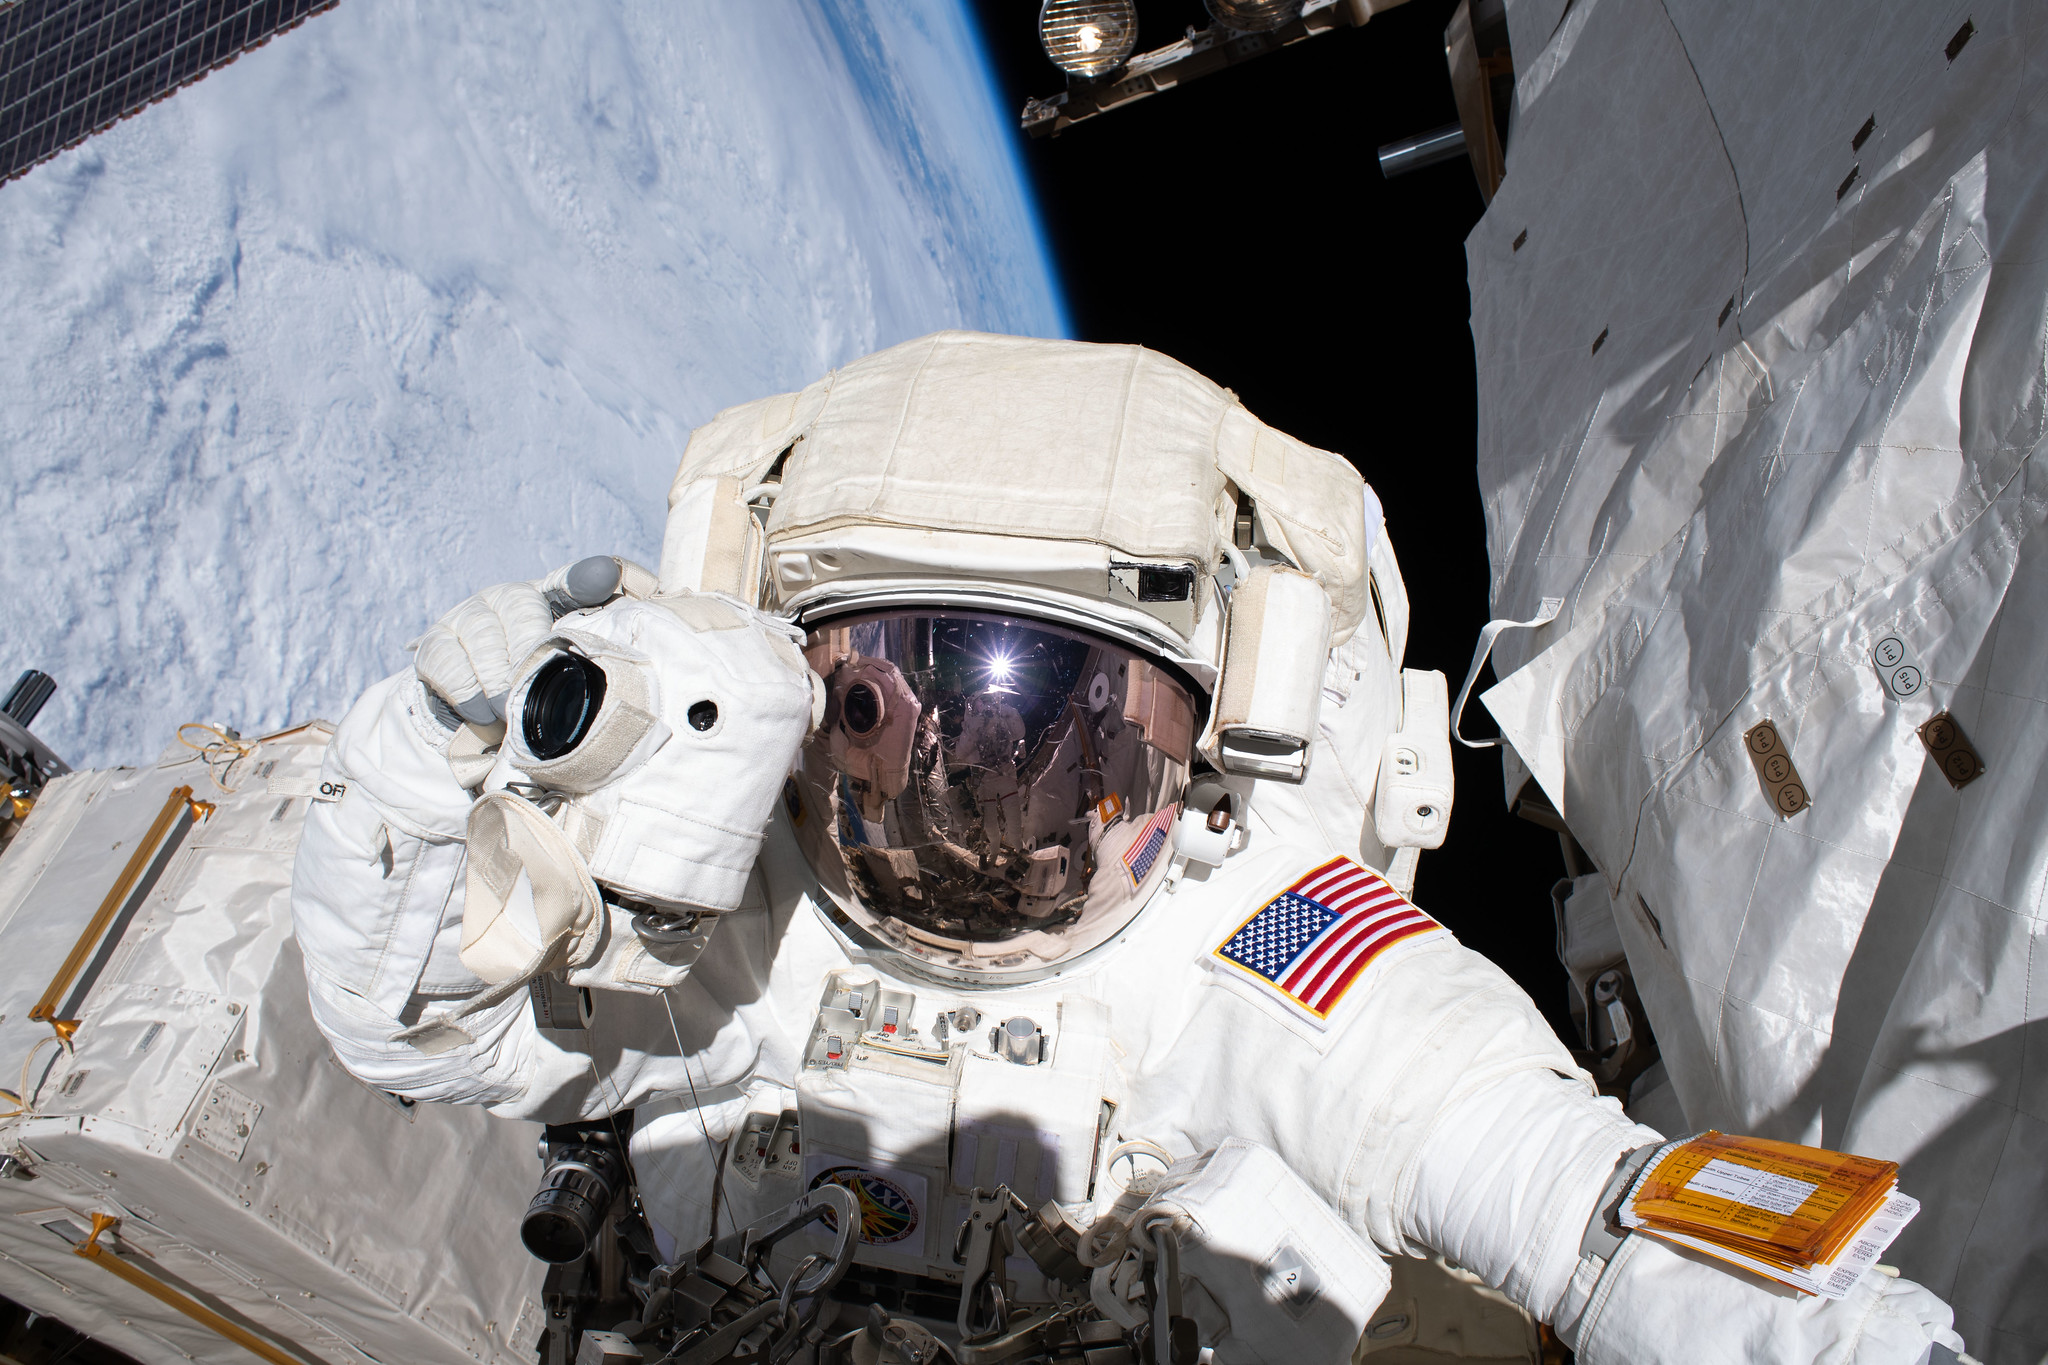 NASA astronaut Andrew Morgan prepares to take a photograph while conducting a spacewalk outside the International Space Station